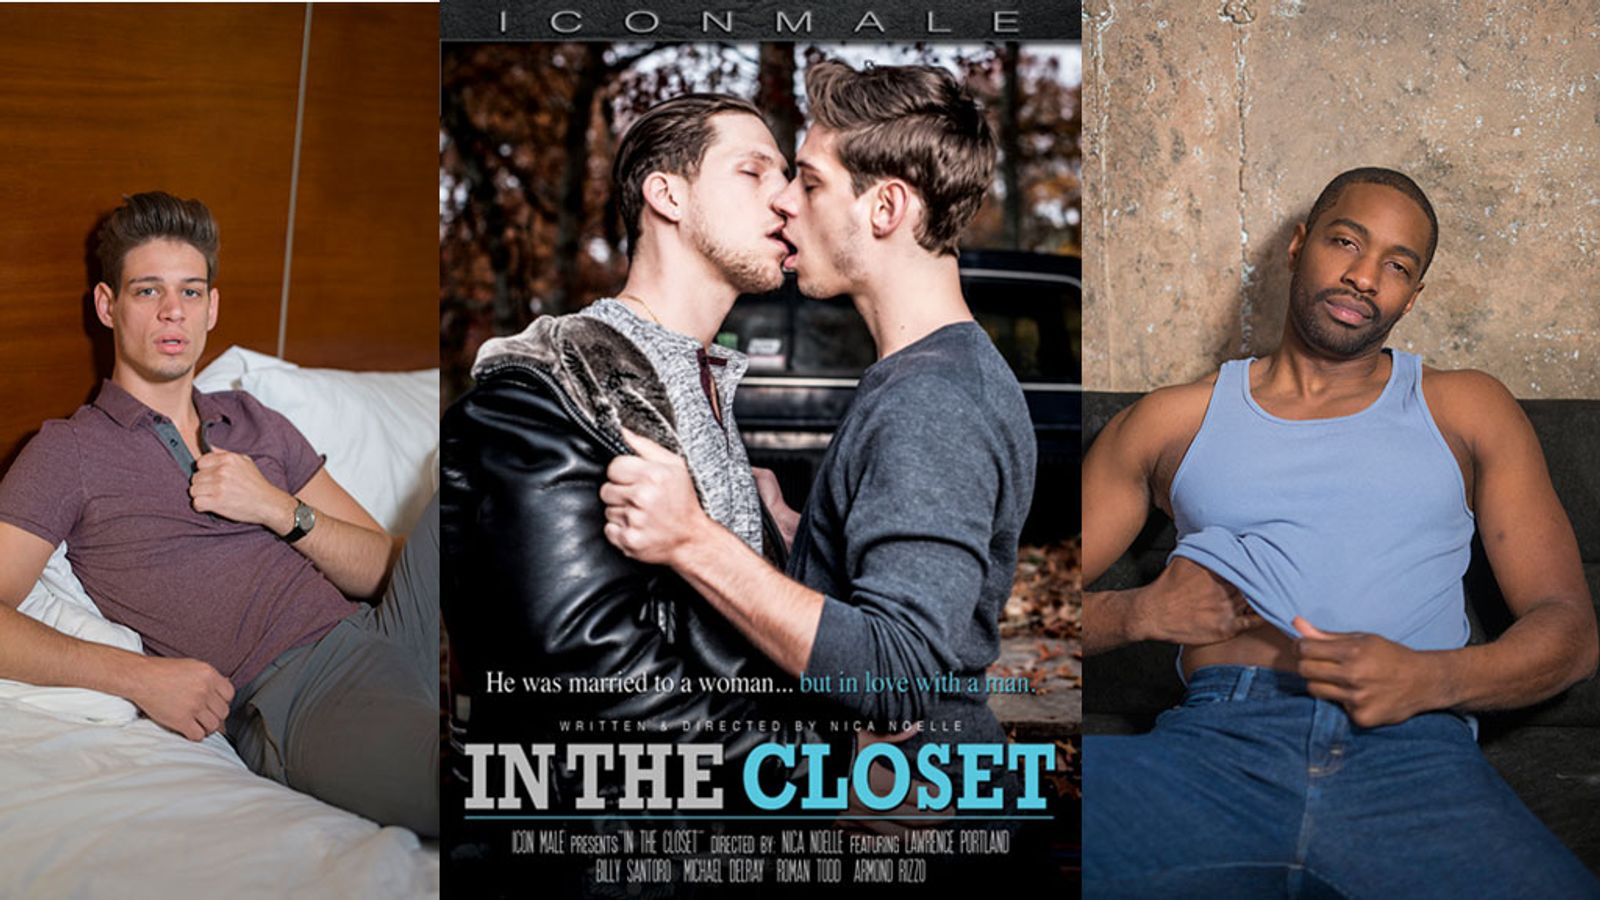 Sexual Secrets Of 2 Men Revealed In Icon Male's 'In The Closet'